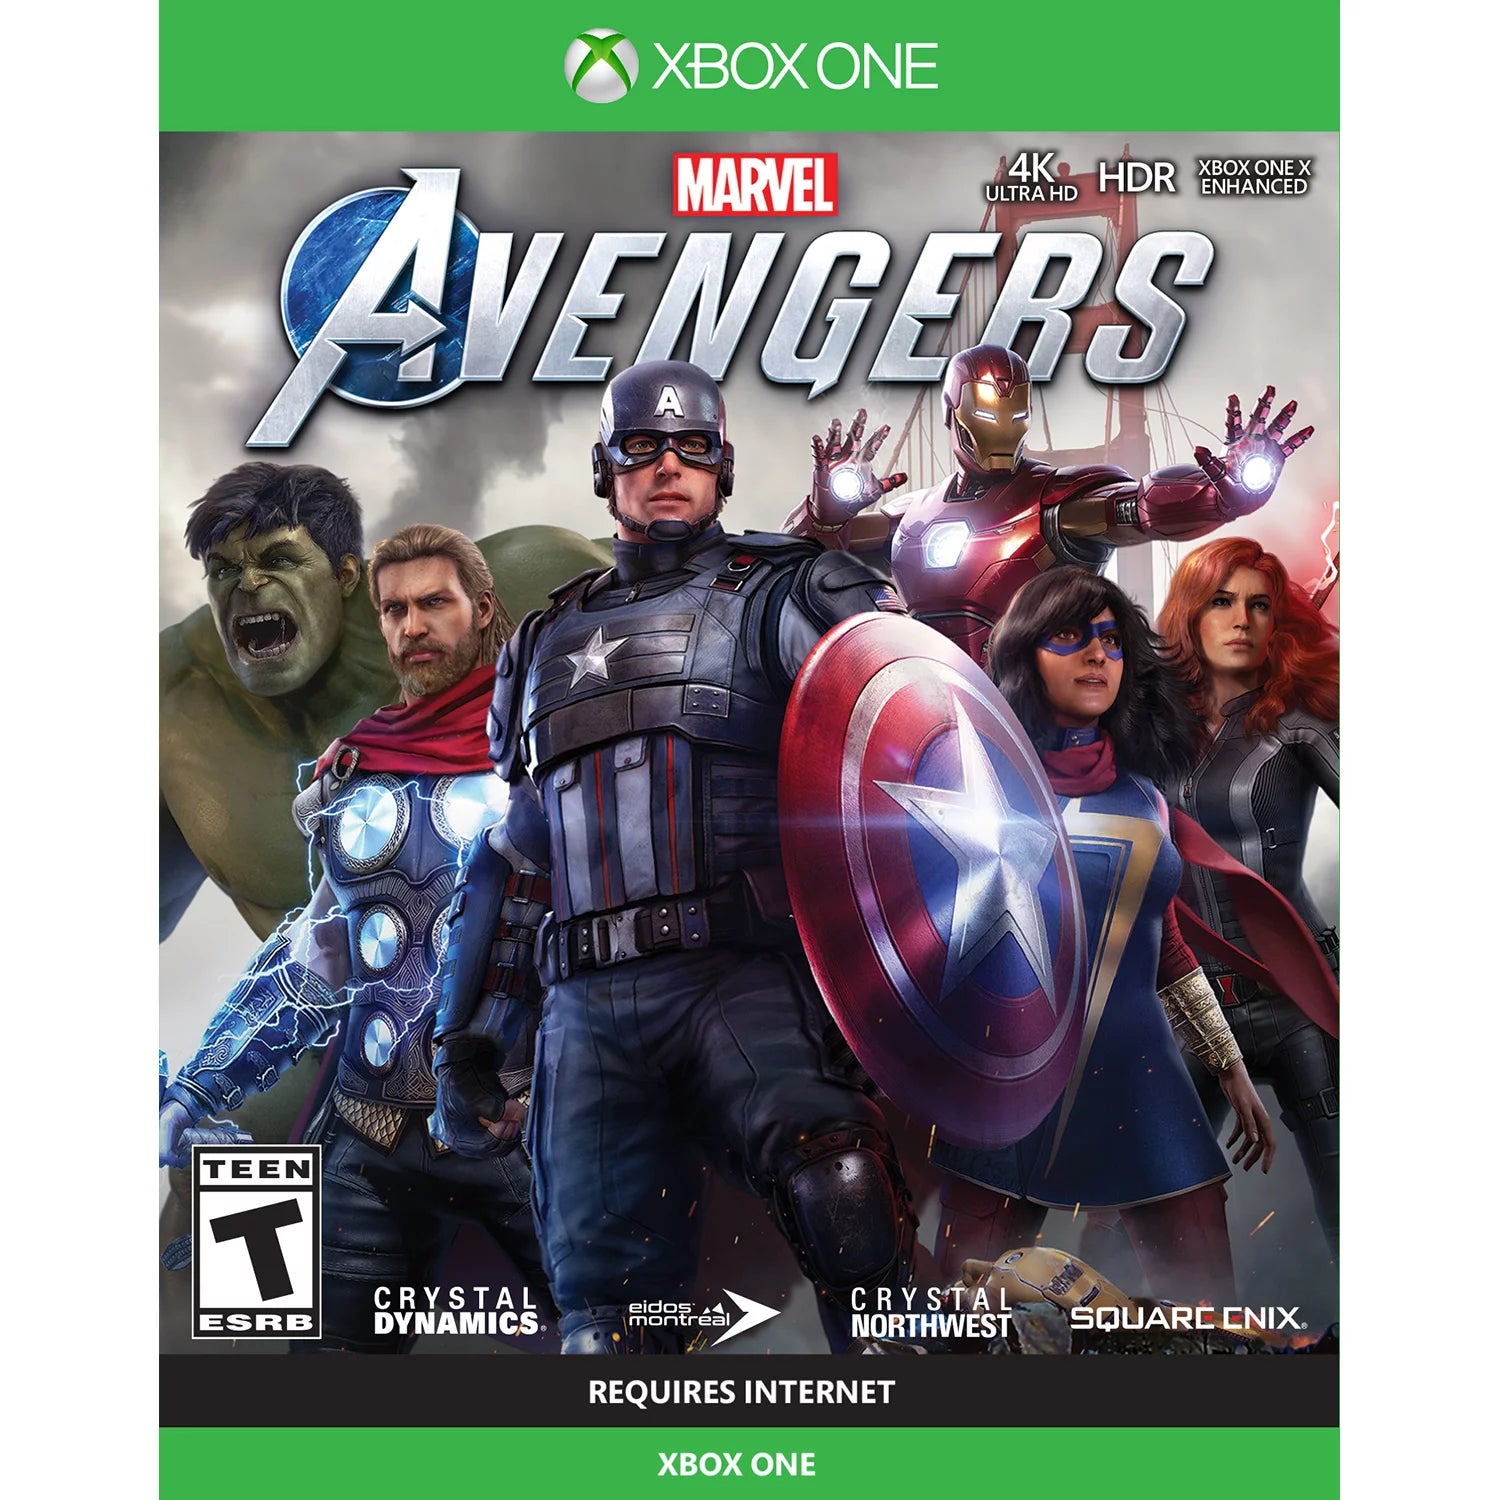 BRAND NEW SEALED! Marvels Avengers Deluxe Edition Xbox One/XB1